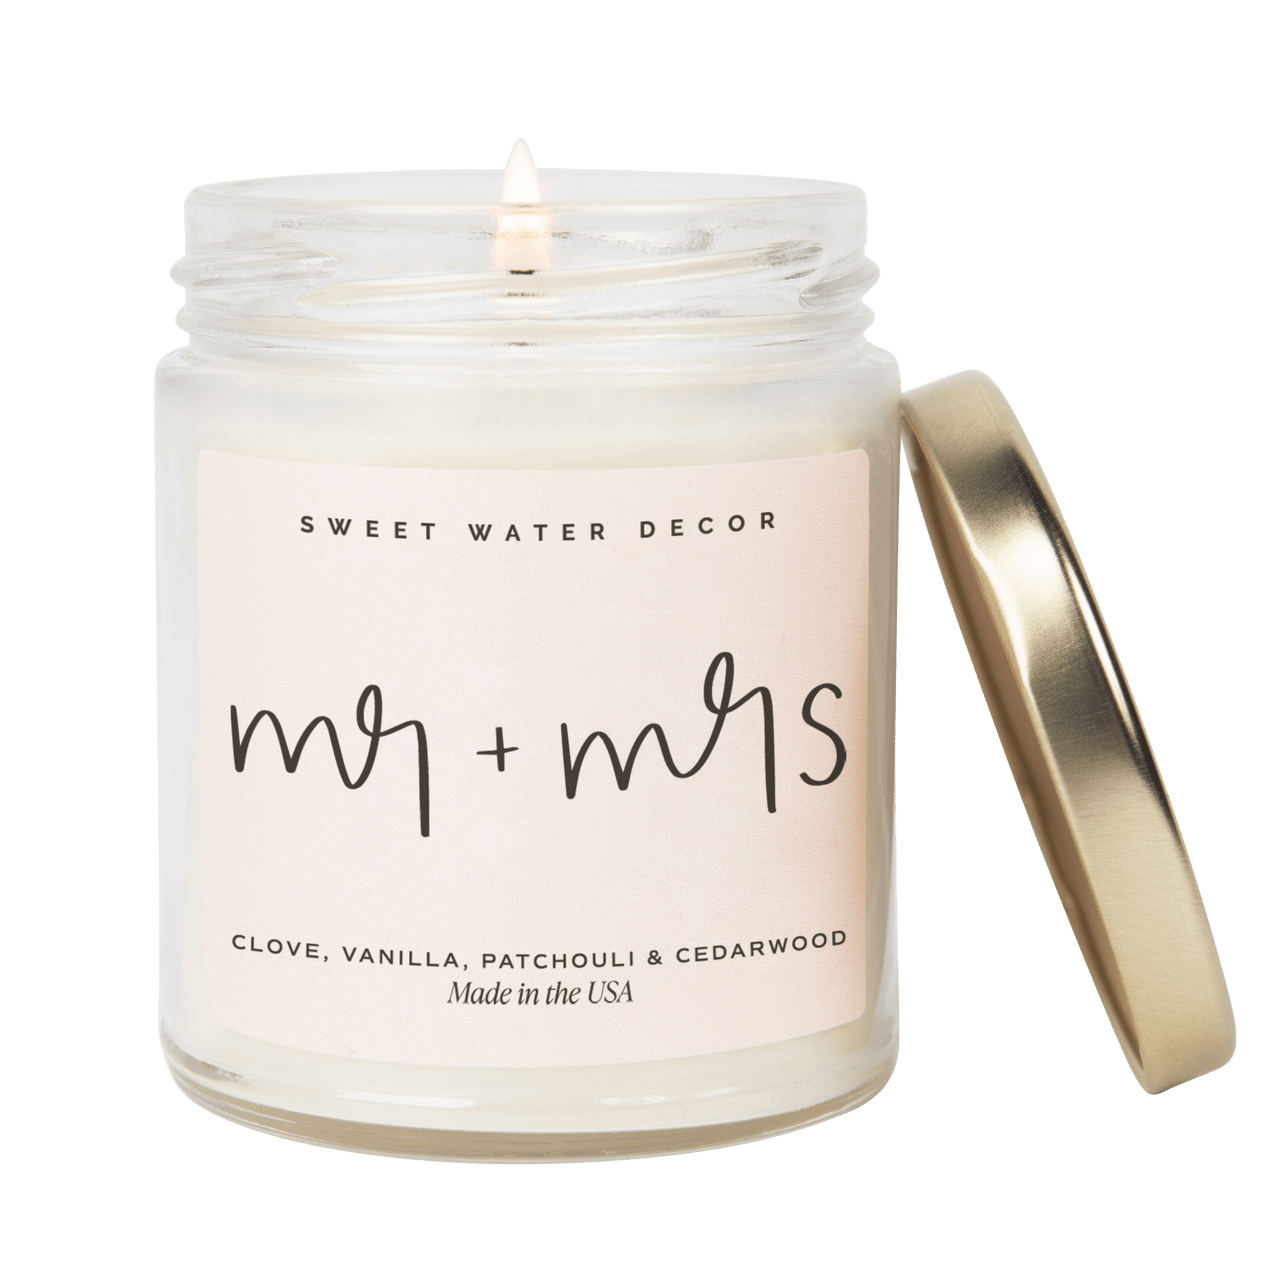 Mr. & Mrs. Quote Candle - Clear Jar - 9 oz (Palo Santo Patchouli) - Tony's Home Furnishings